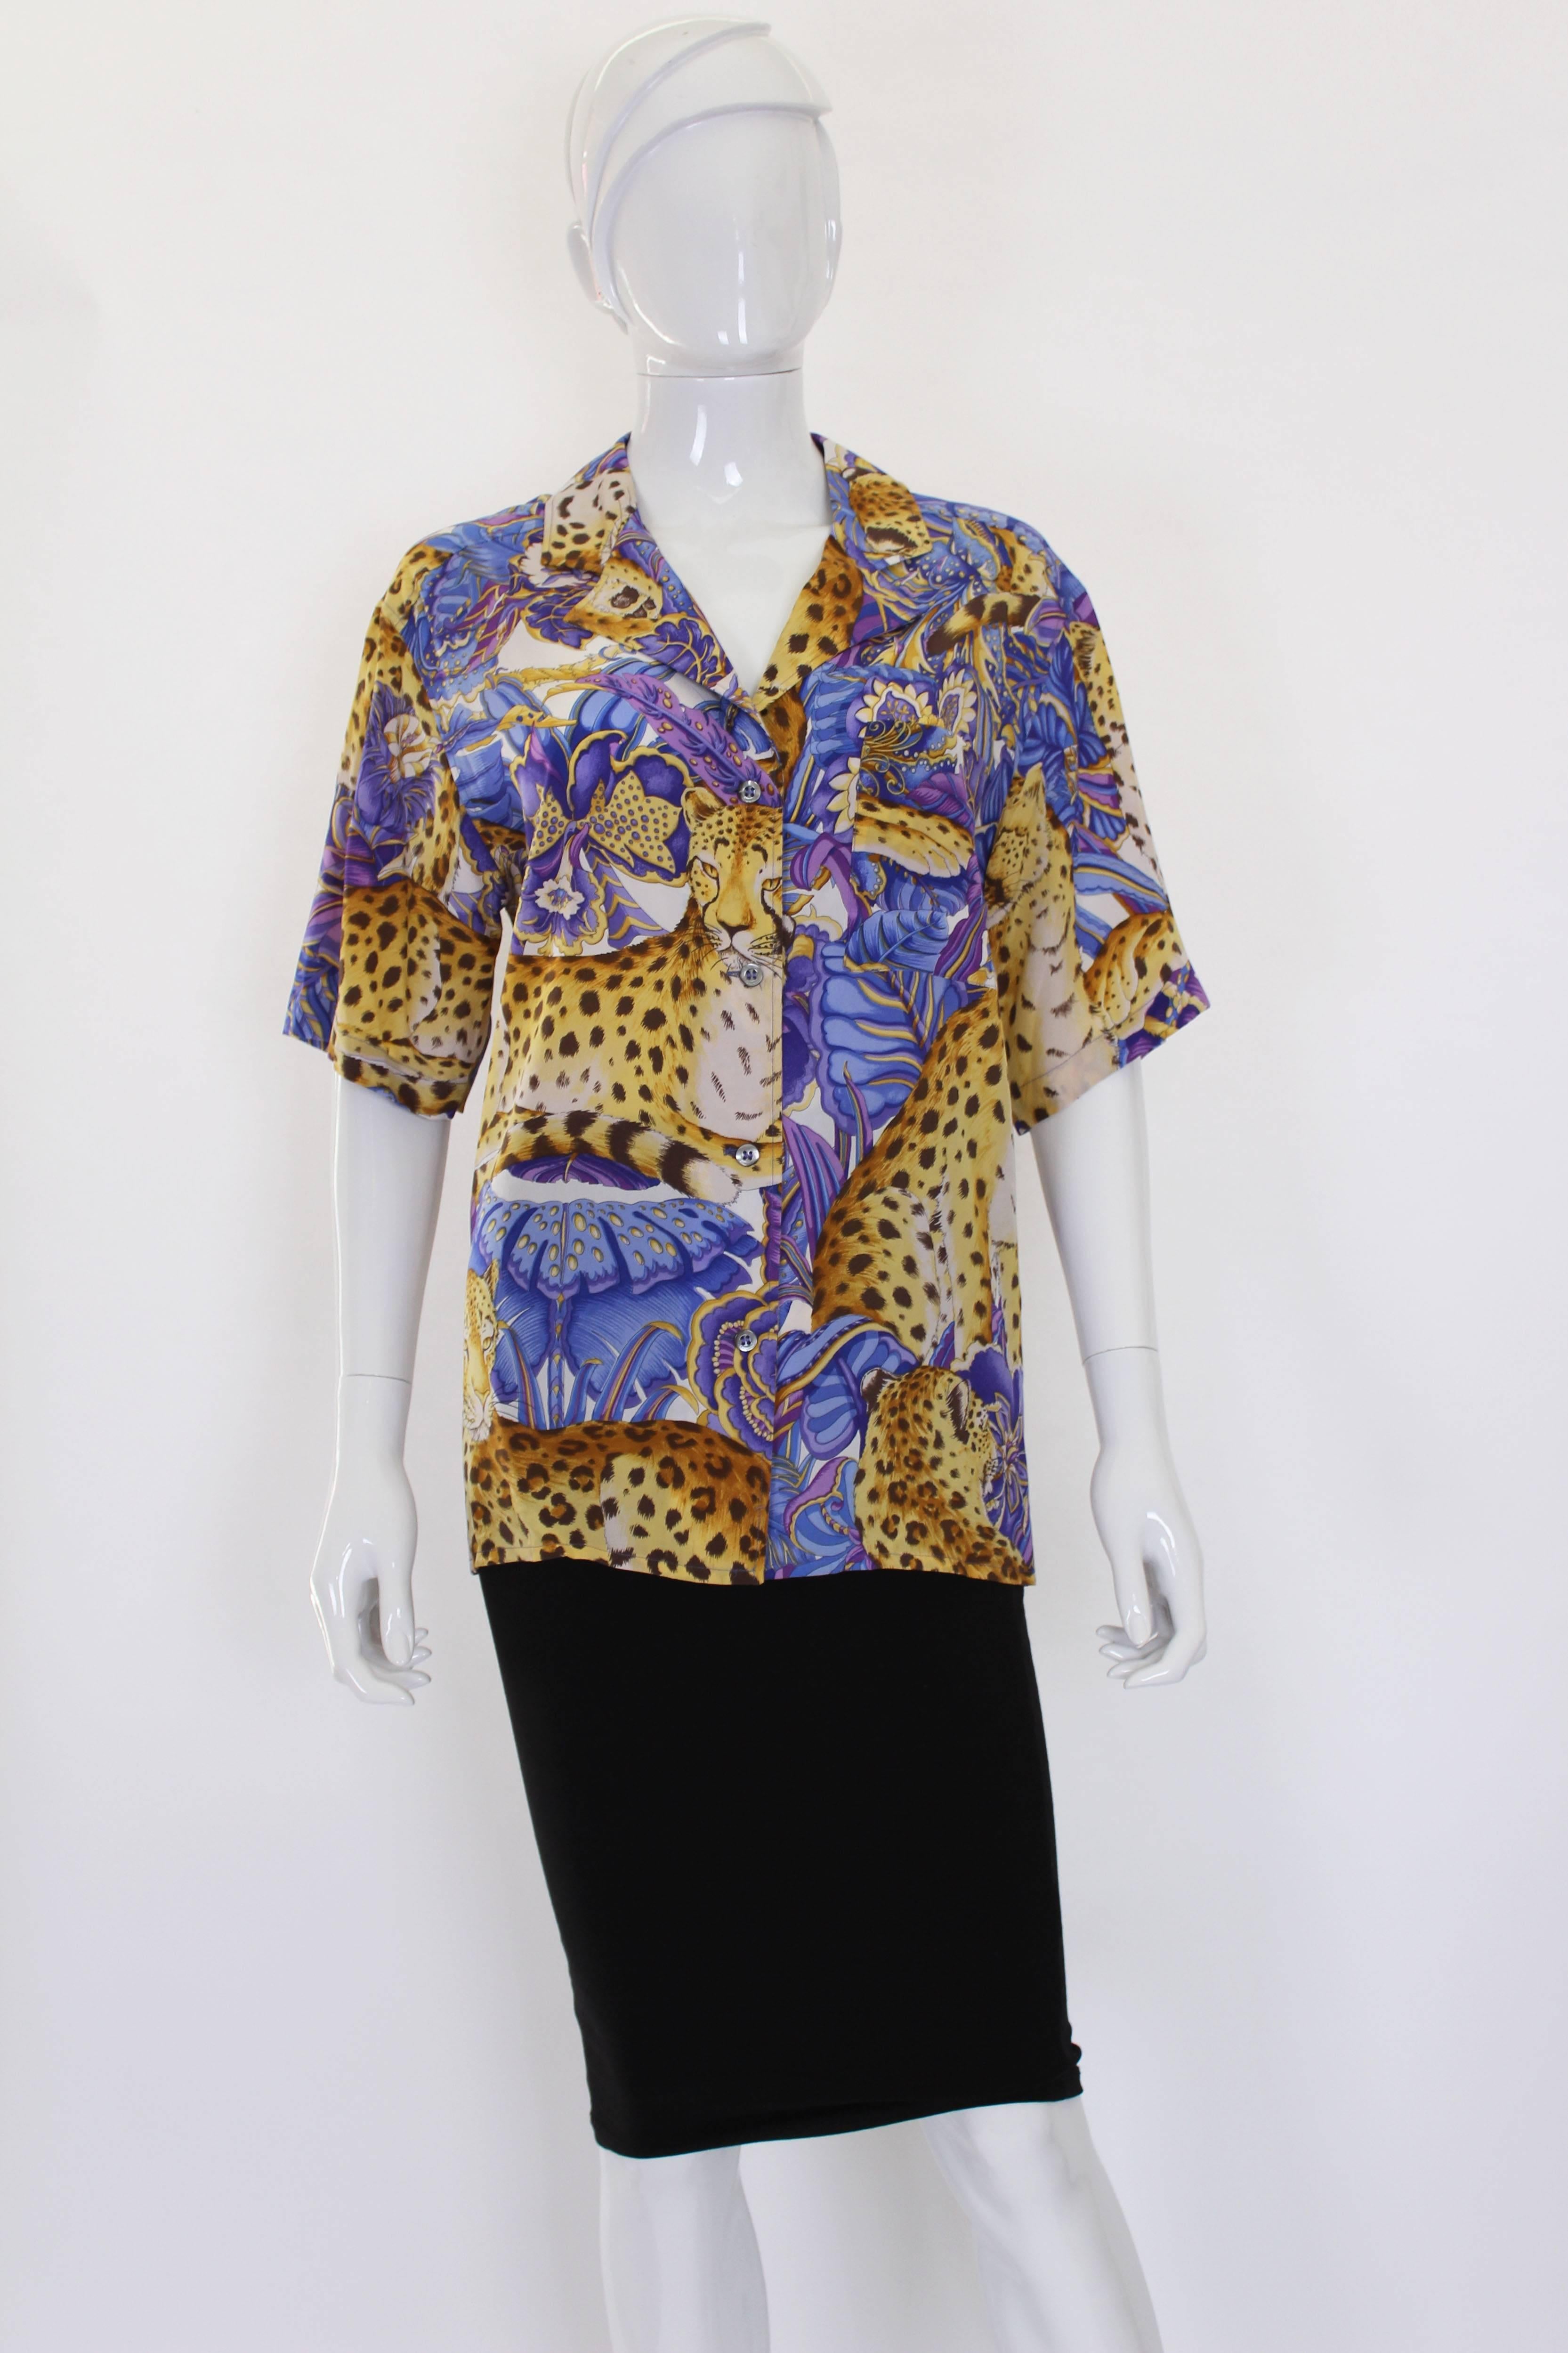 A wonderful silk shirt by Italian house Salvatore Ferragamo. This shirt  has a colourful print of leopards and flowers, in gold, brown, purple, mauve and white. It has a 4 button opening at the front, a breast pocket on the left hand side and short